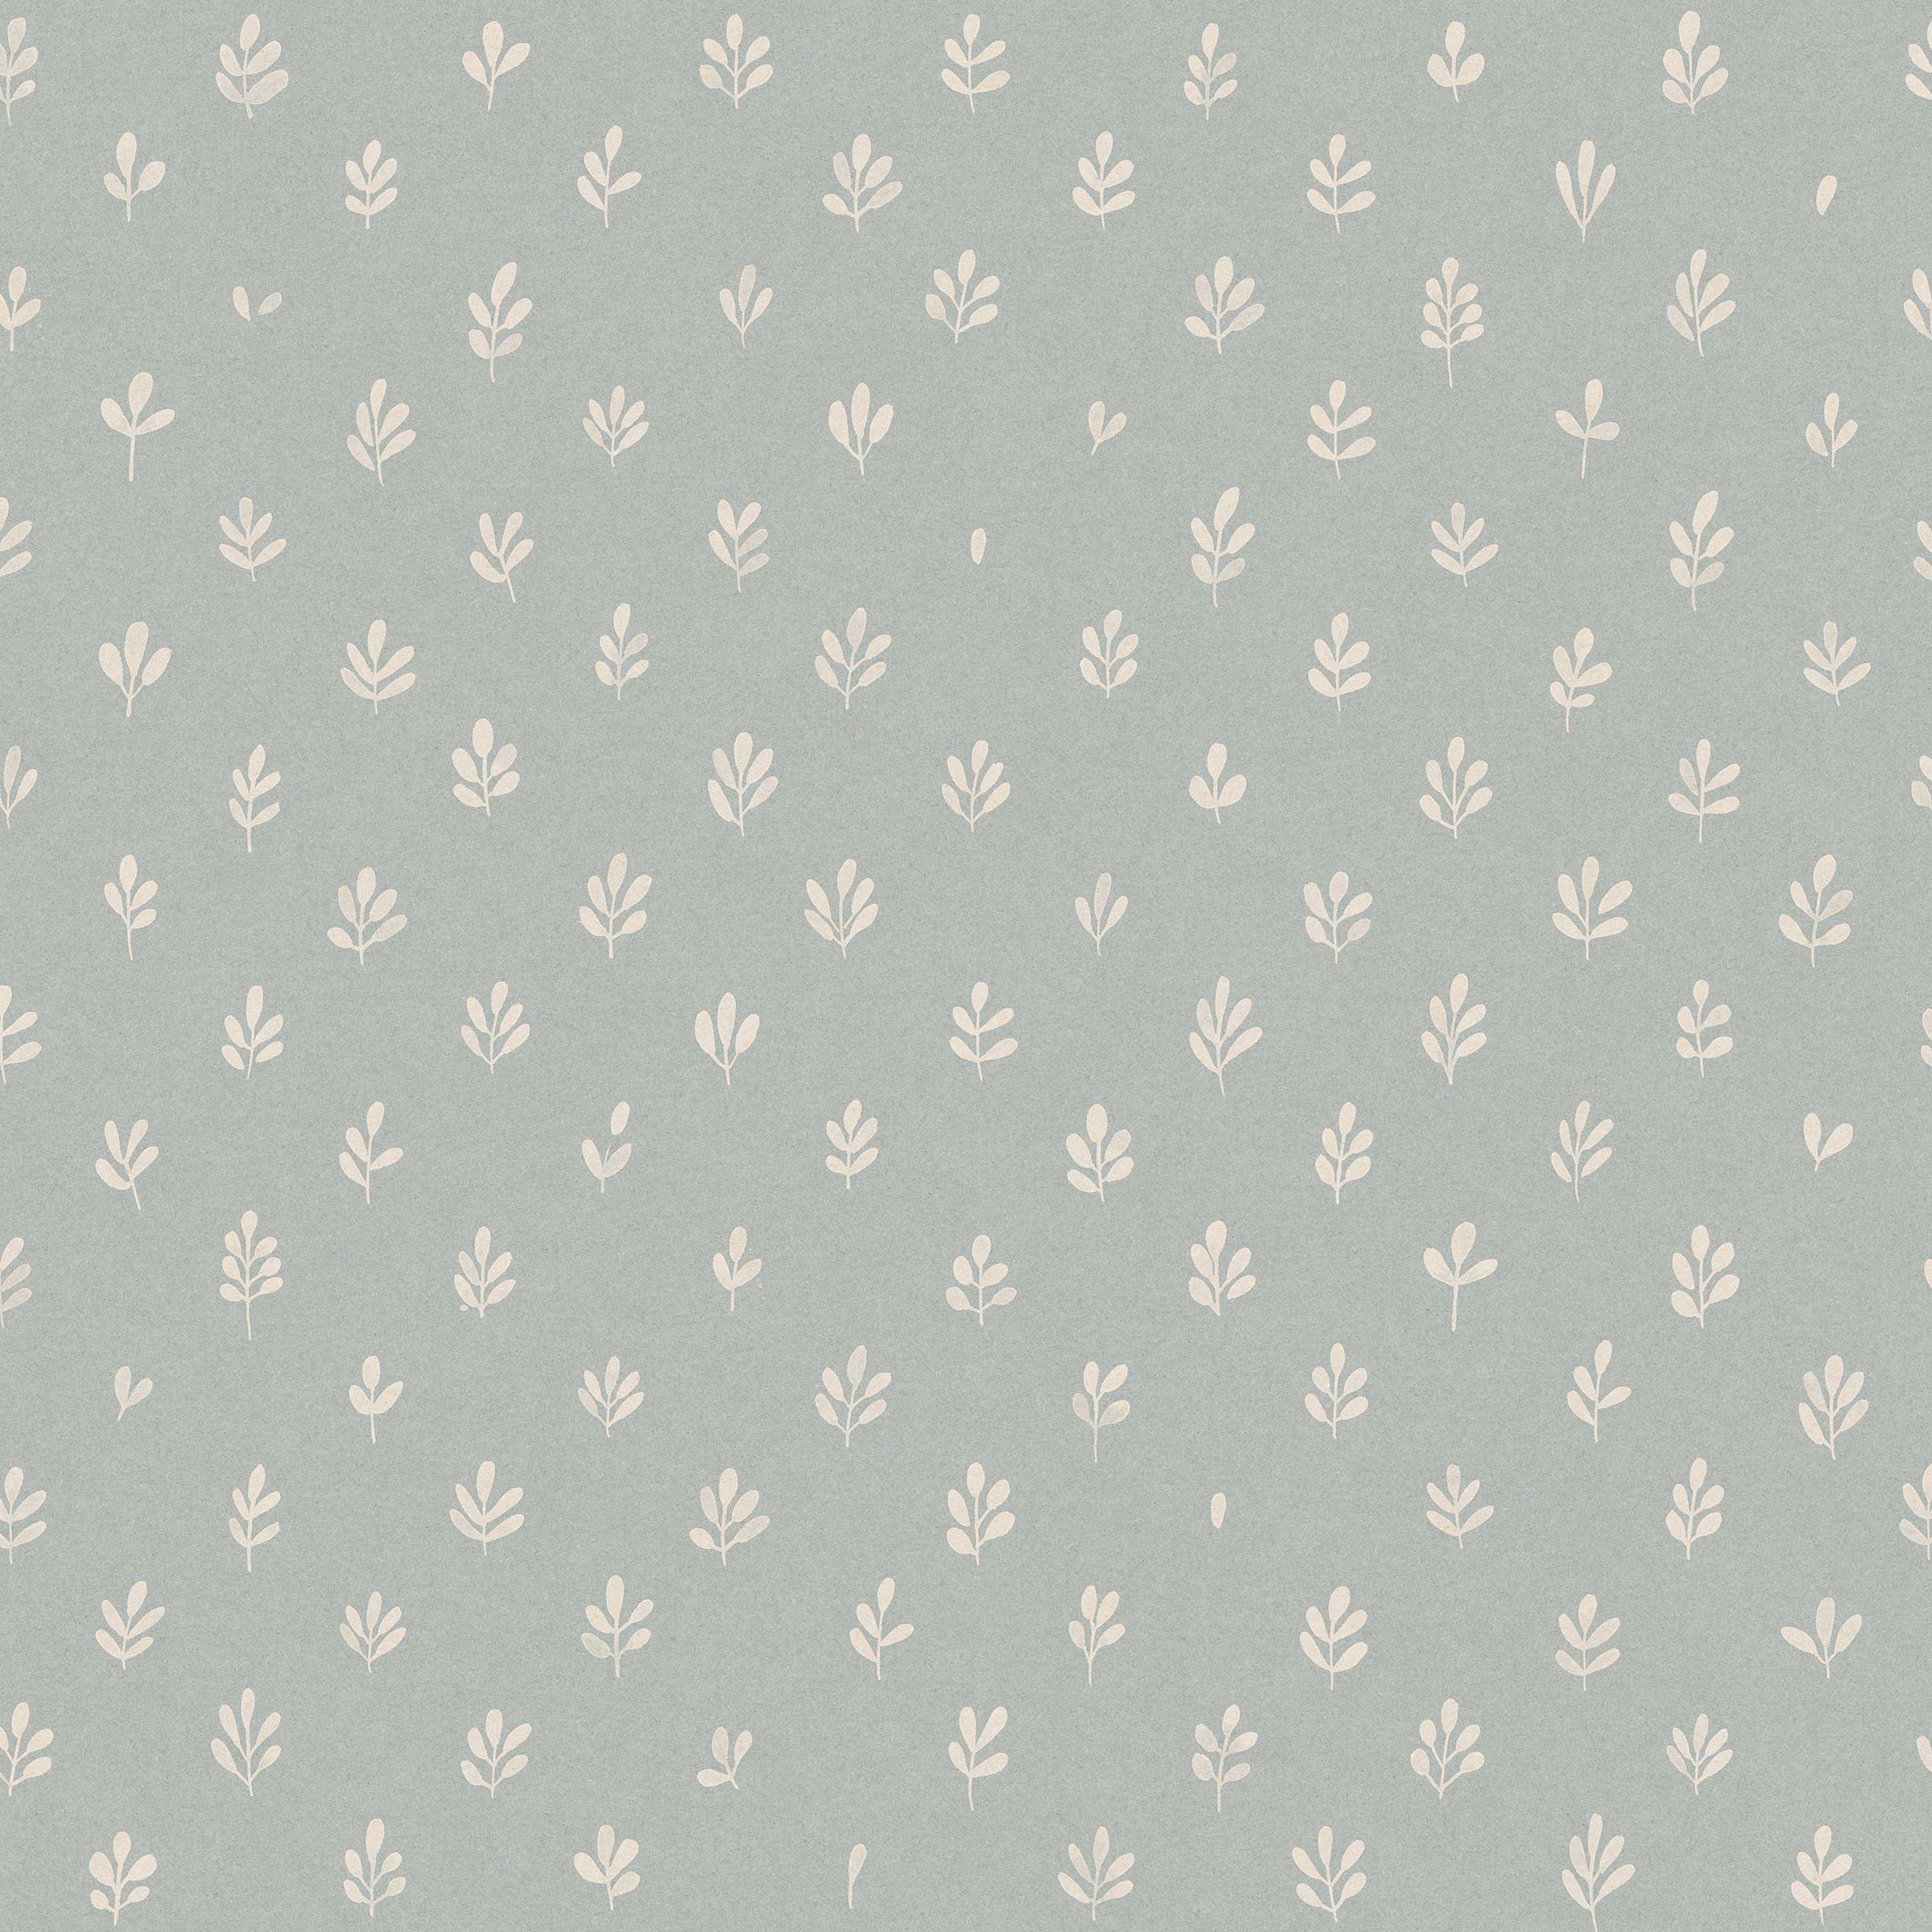 Detail of wallpaper in a repeating leaf print in cream on a light blue field.